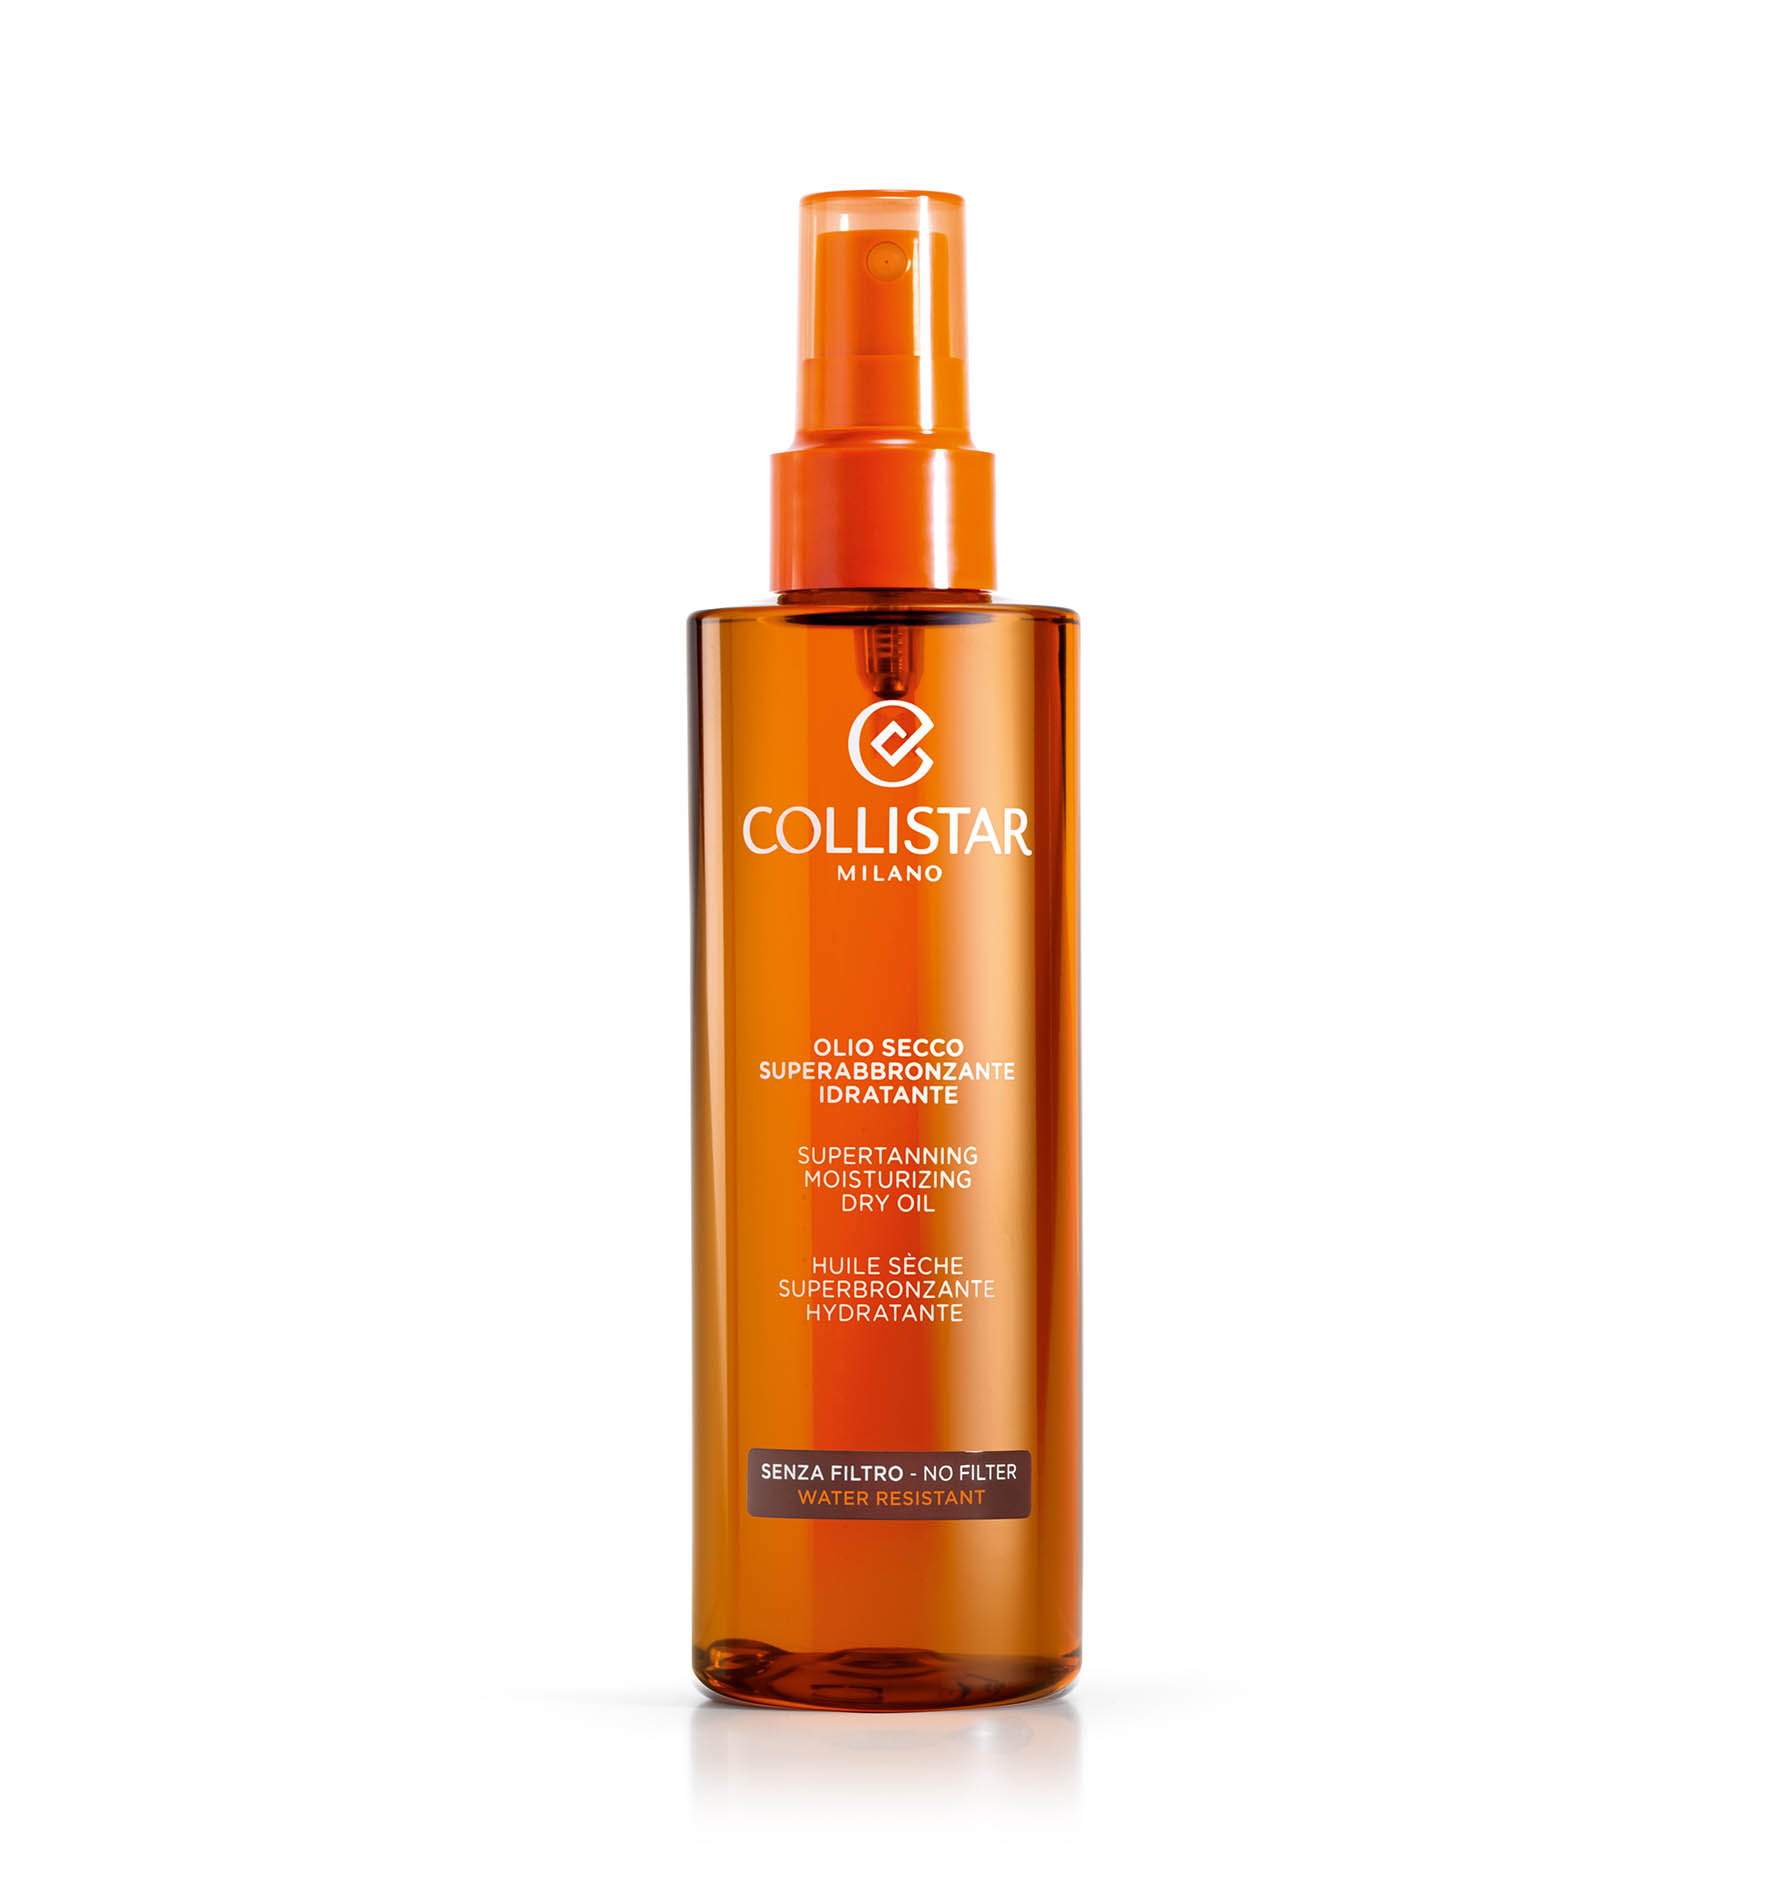 SUPERTANNING DRY OIL - No protection | Collistar - Shop Online Ufficiale